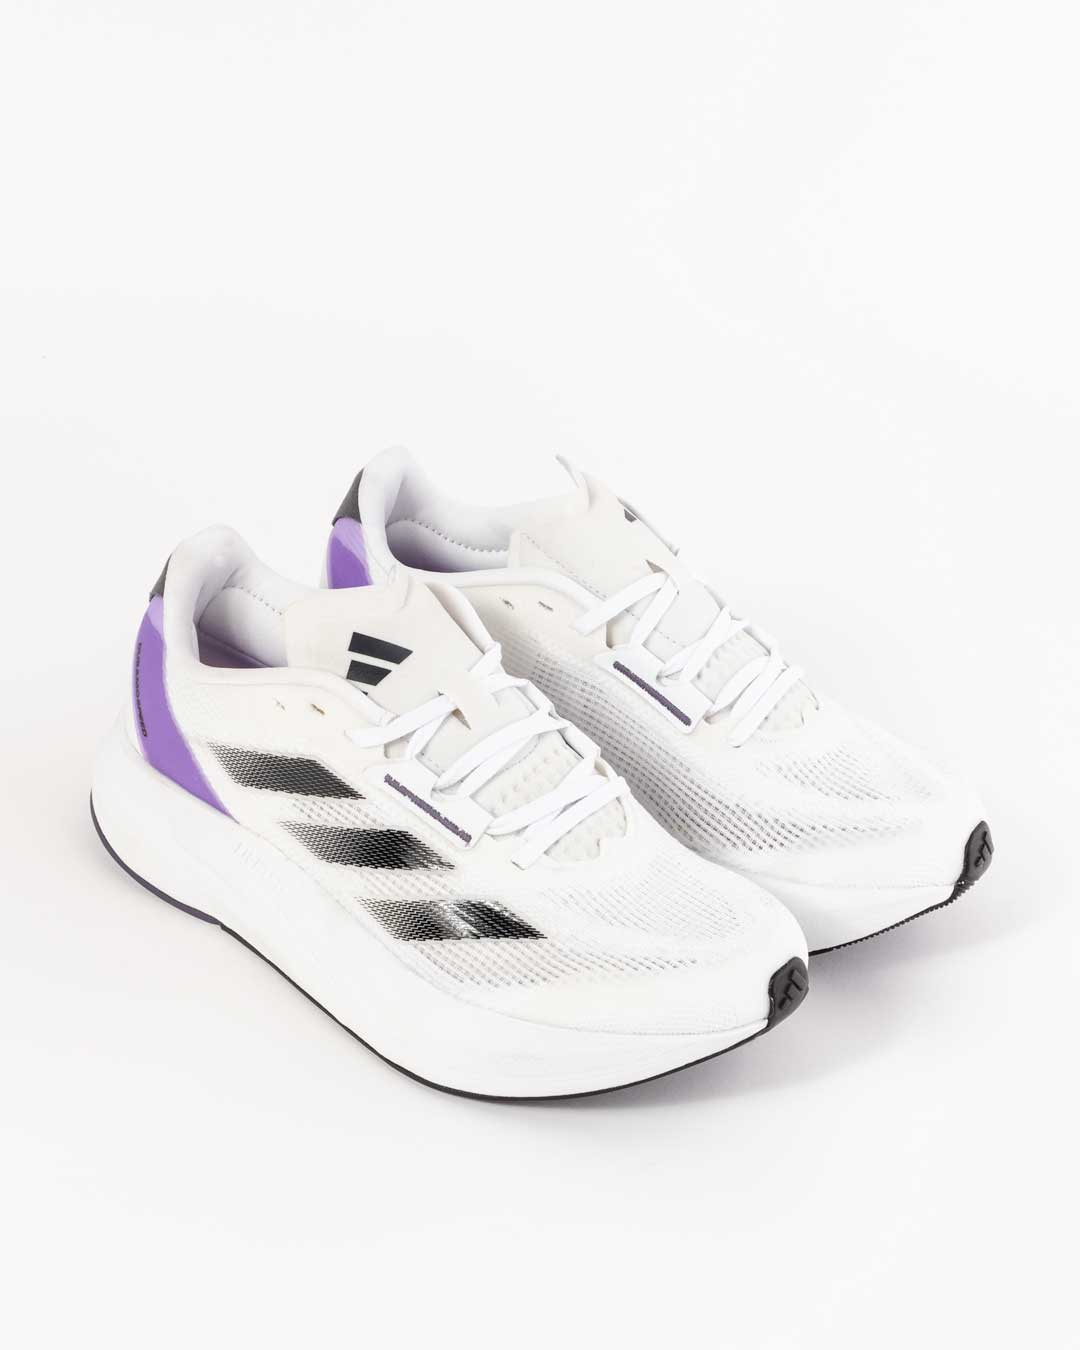 side angled shot of women's white 3 stripe paneling in ombre black on upper and purple paneling in purple with Duramo speed embossed, adidas 3 stripe logo on tongue